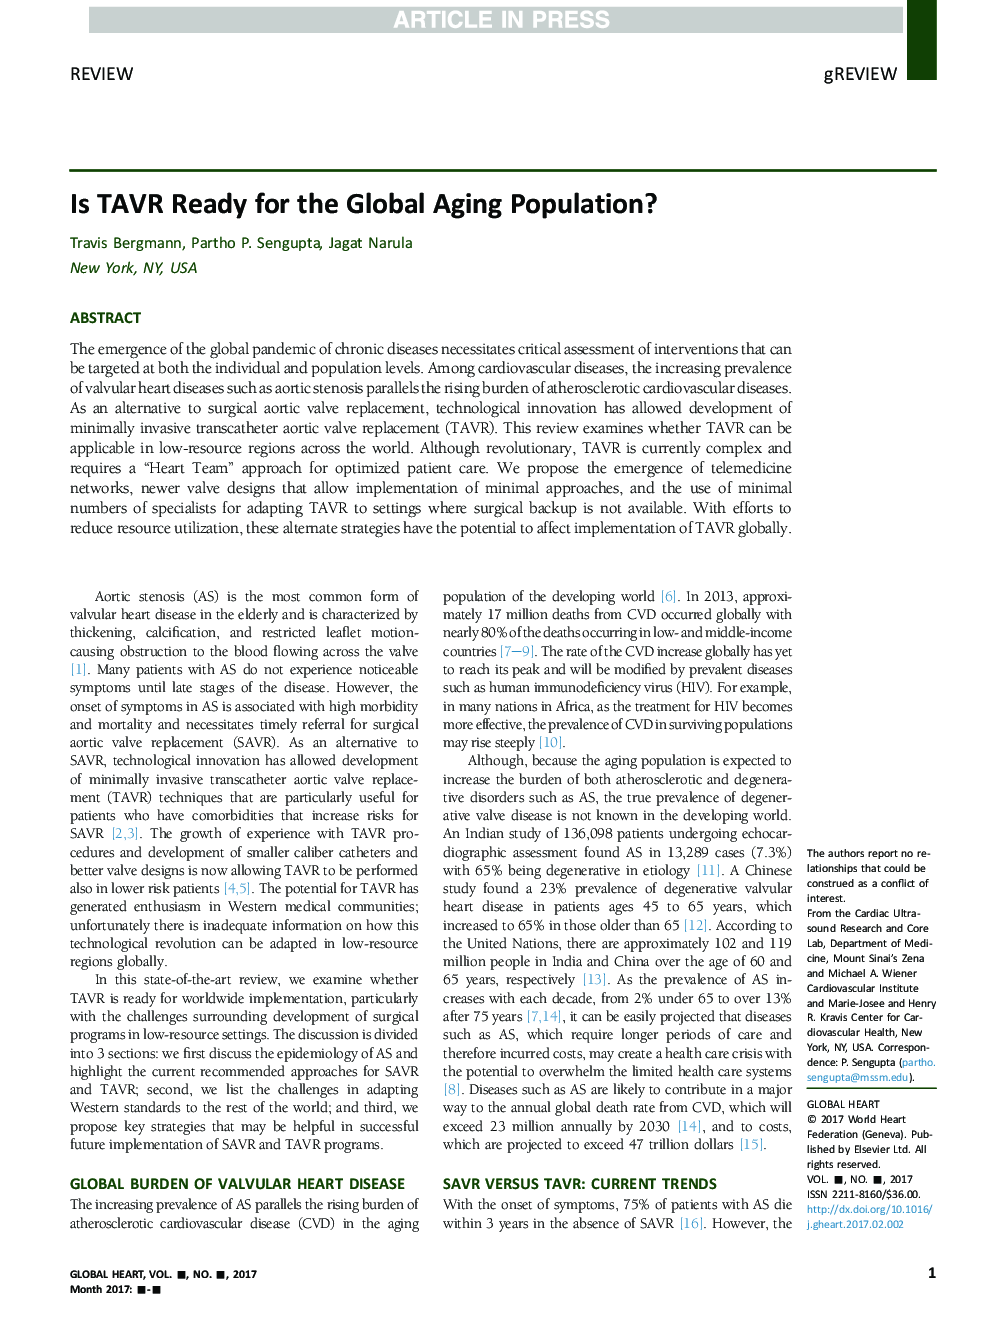 Is TAVR Ready for the Global Aging Population?